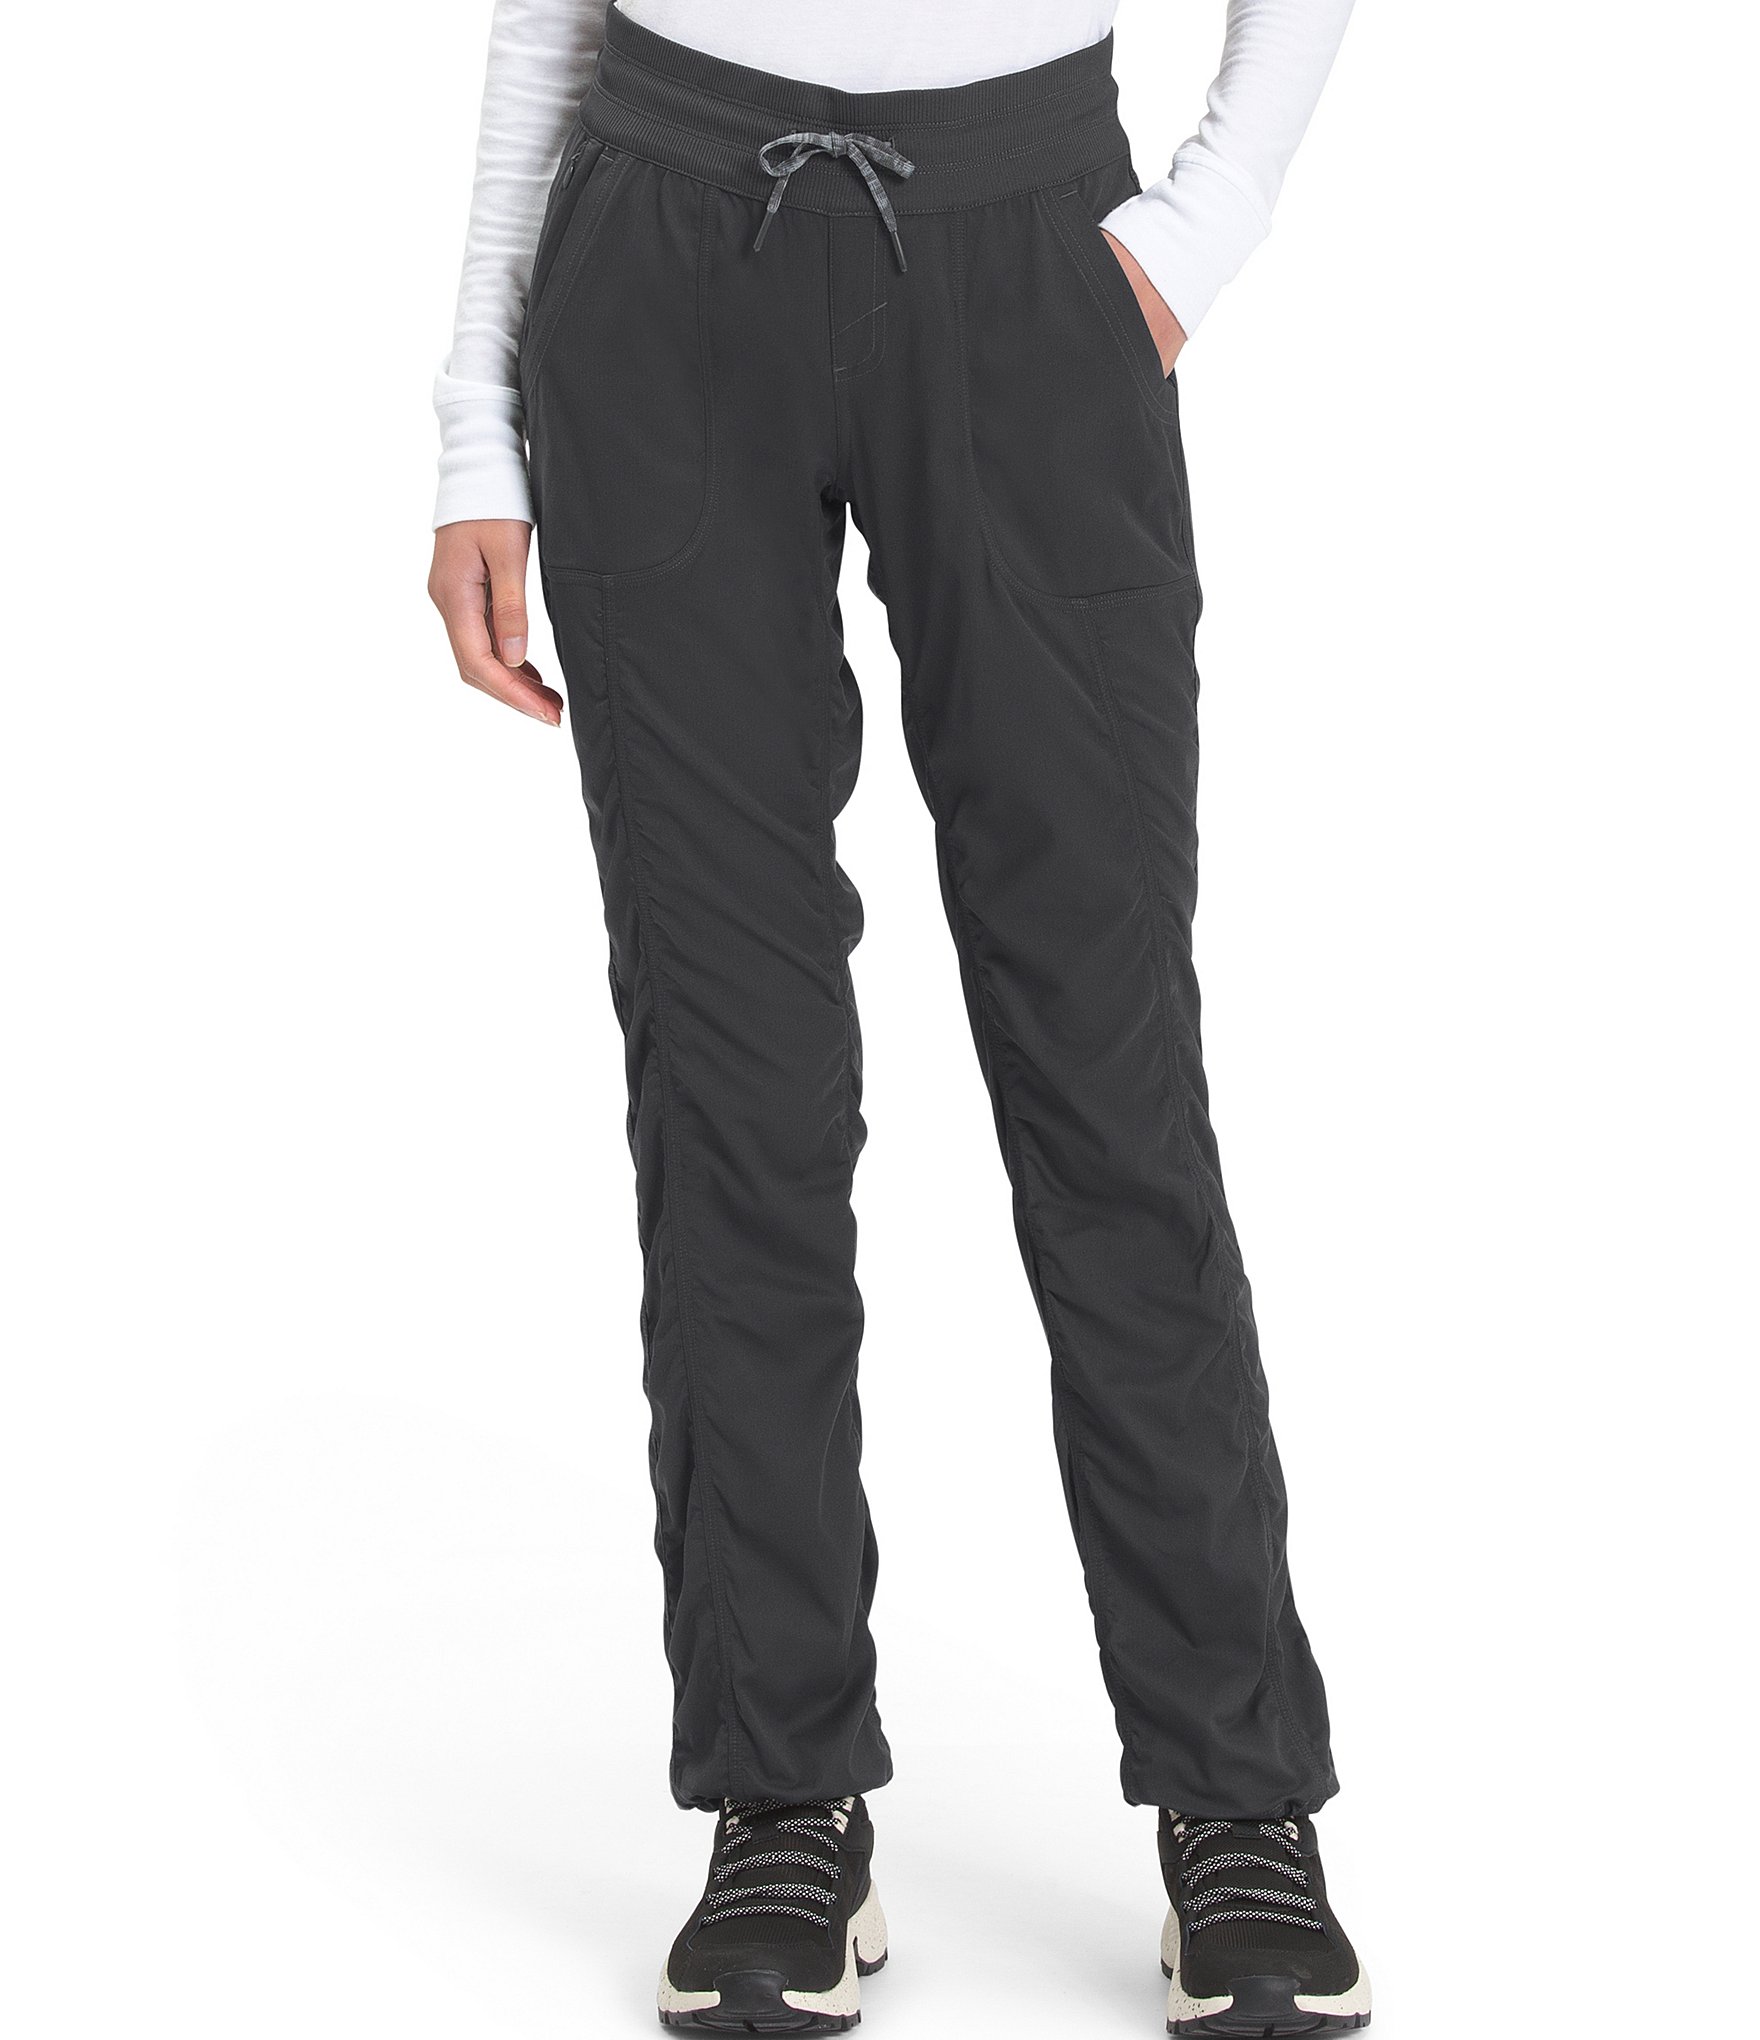 The North Face Aphrodite 2.0 Pant - Women’s